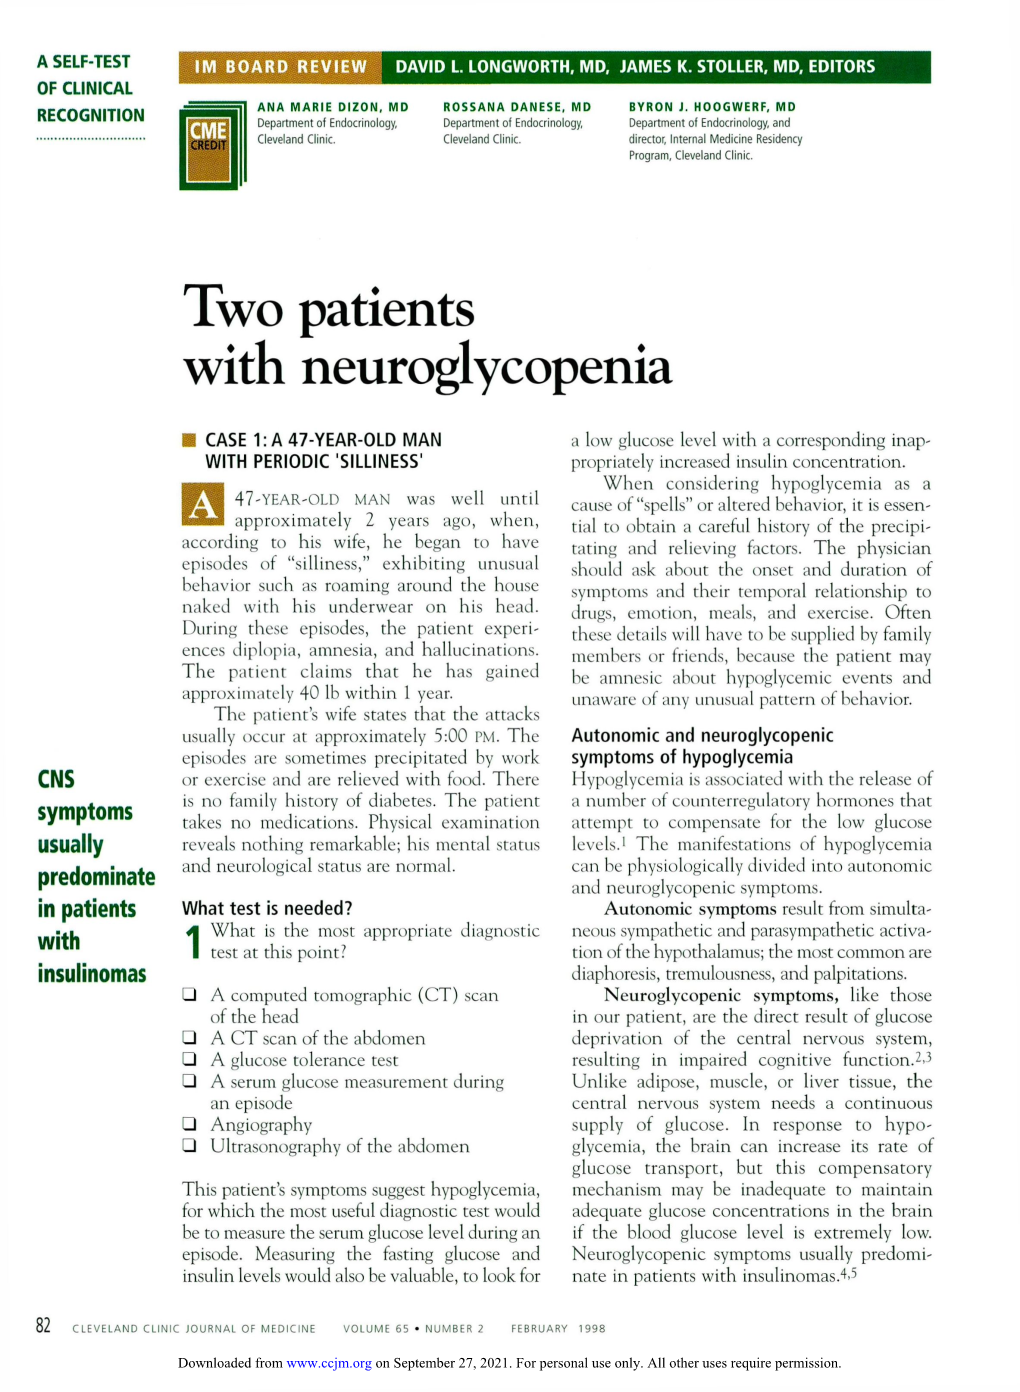 Two Patients with Neuroglycopenia